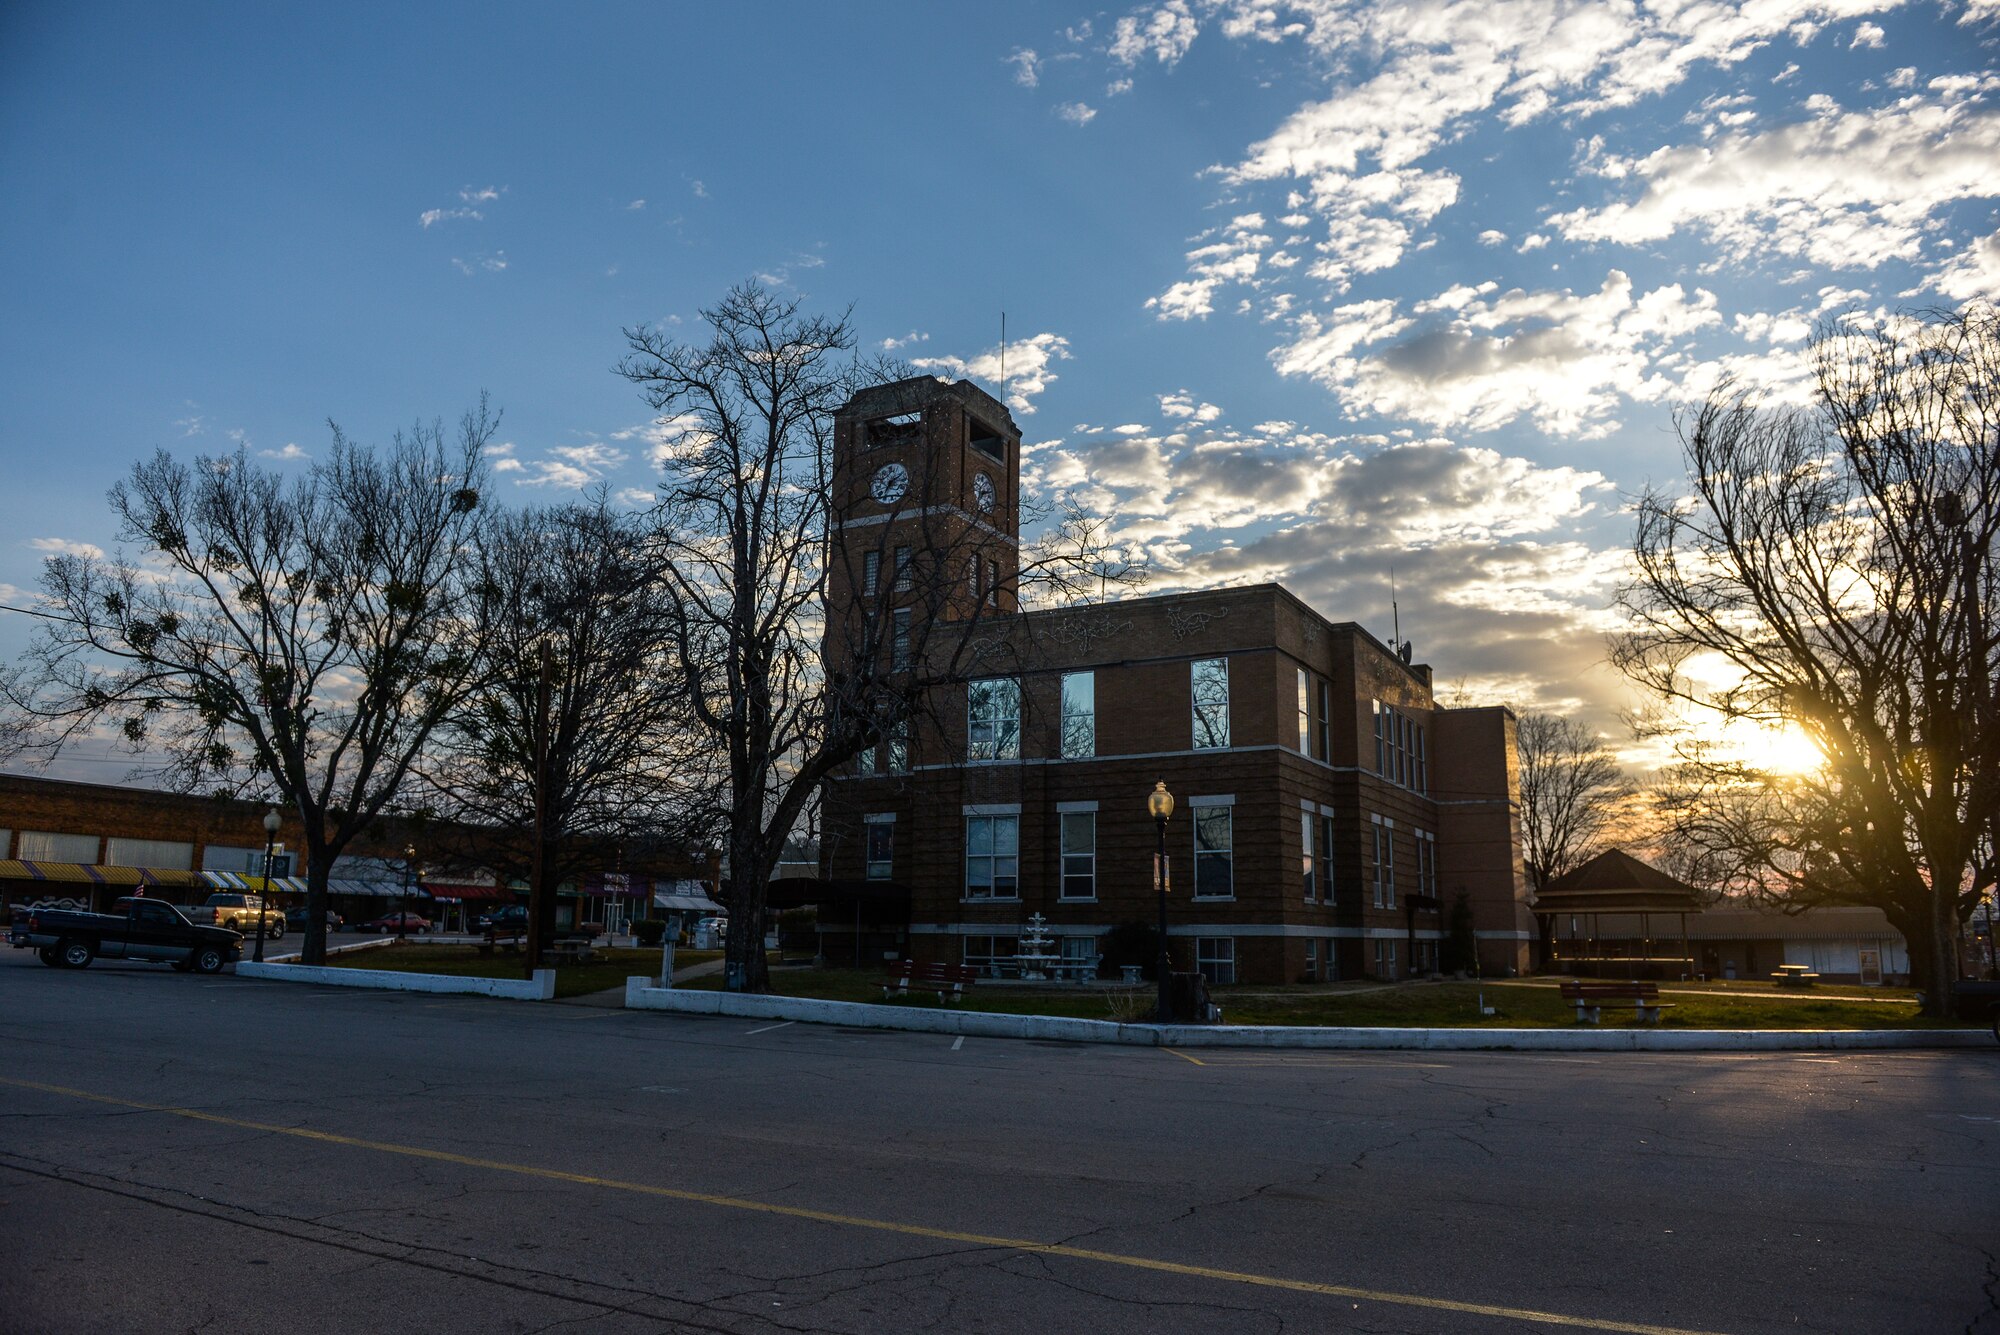 The sun rises over the Franklin County Courthouse March 9, 2013, in Ozark, Ark. The courthouse anchors the city square, which is also home to historic sites and small business. 